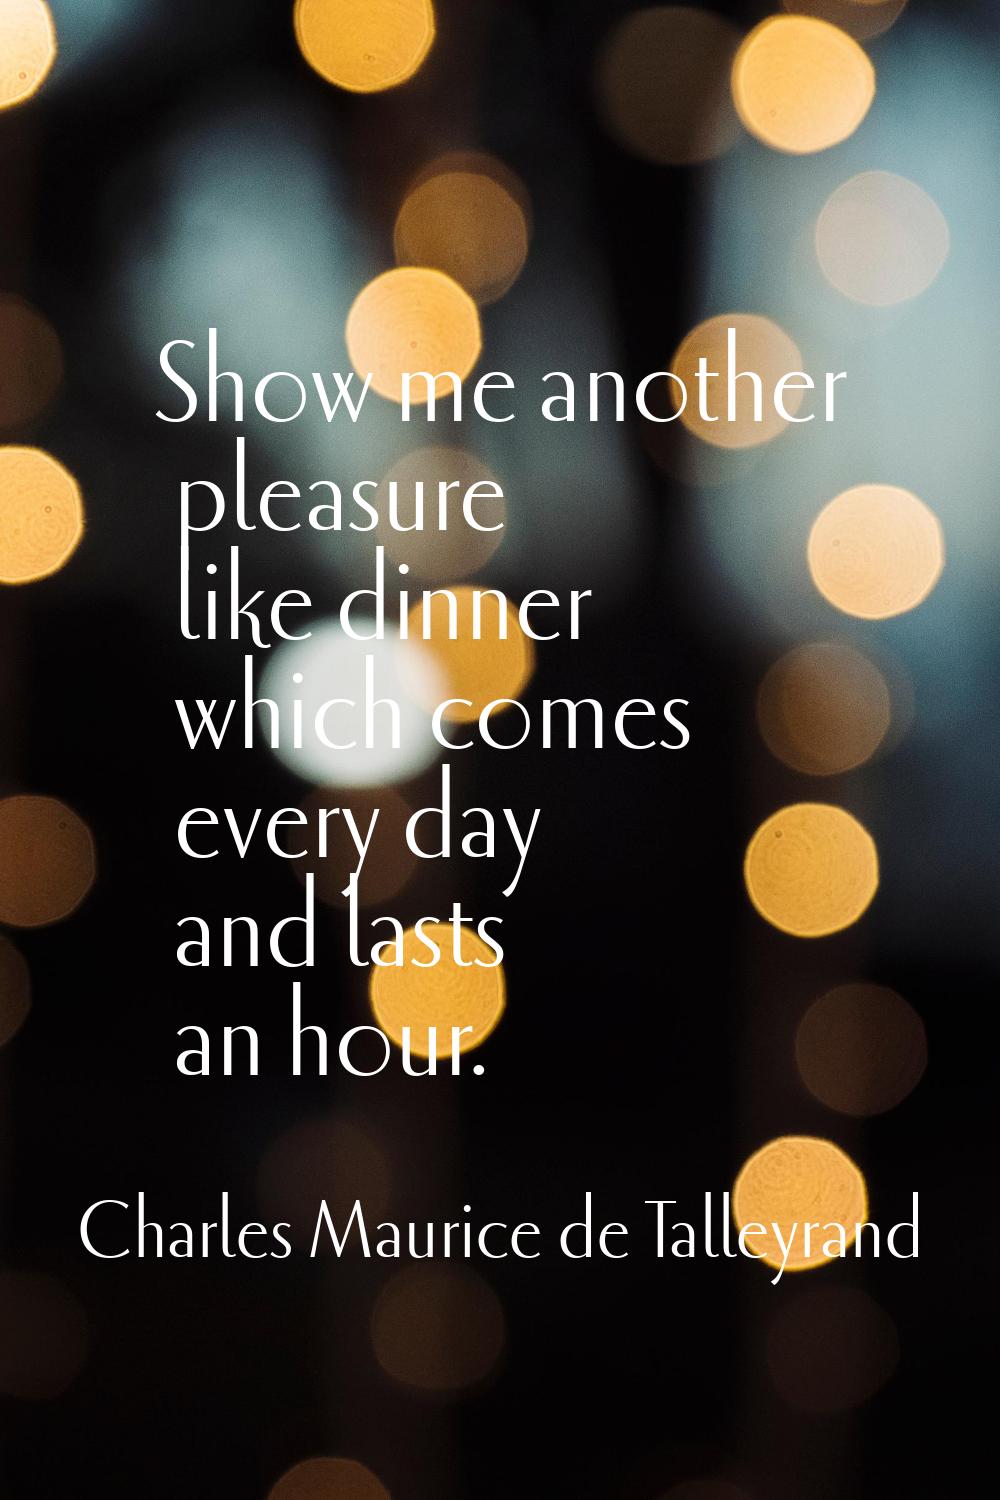 Show me another pleasure like dinner which comes every day and lasts an hour.